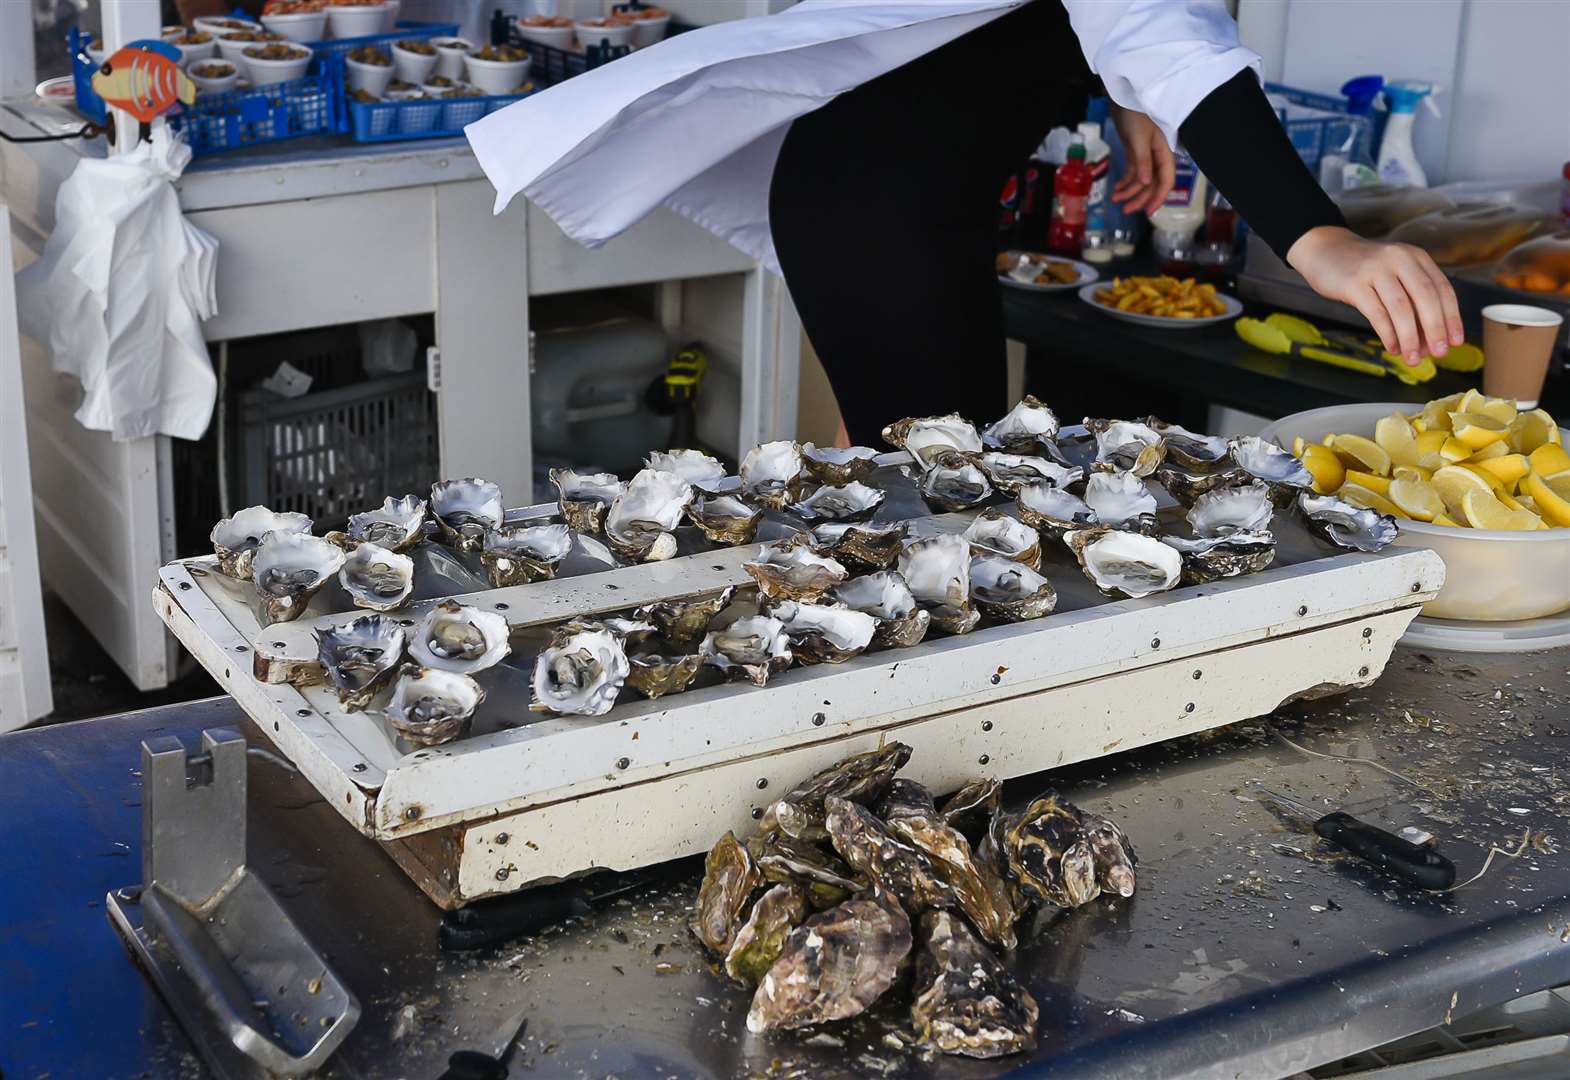 The EU has placed restrictions on live shellfish exports